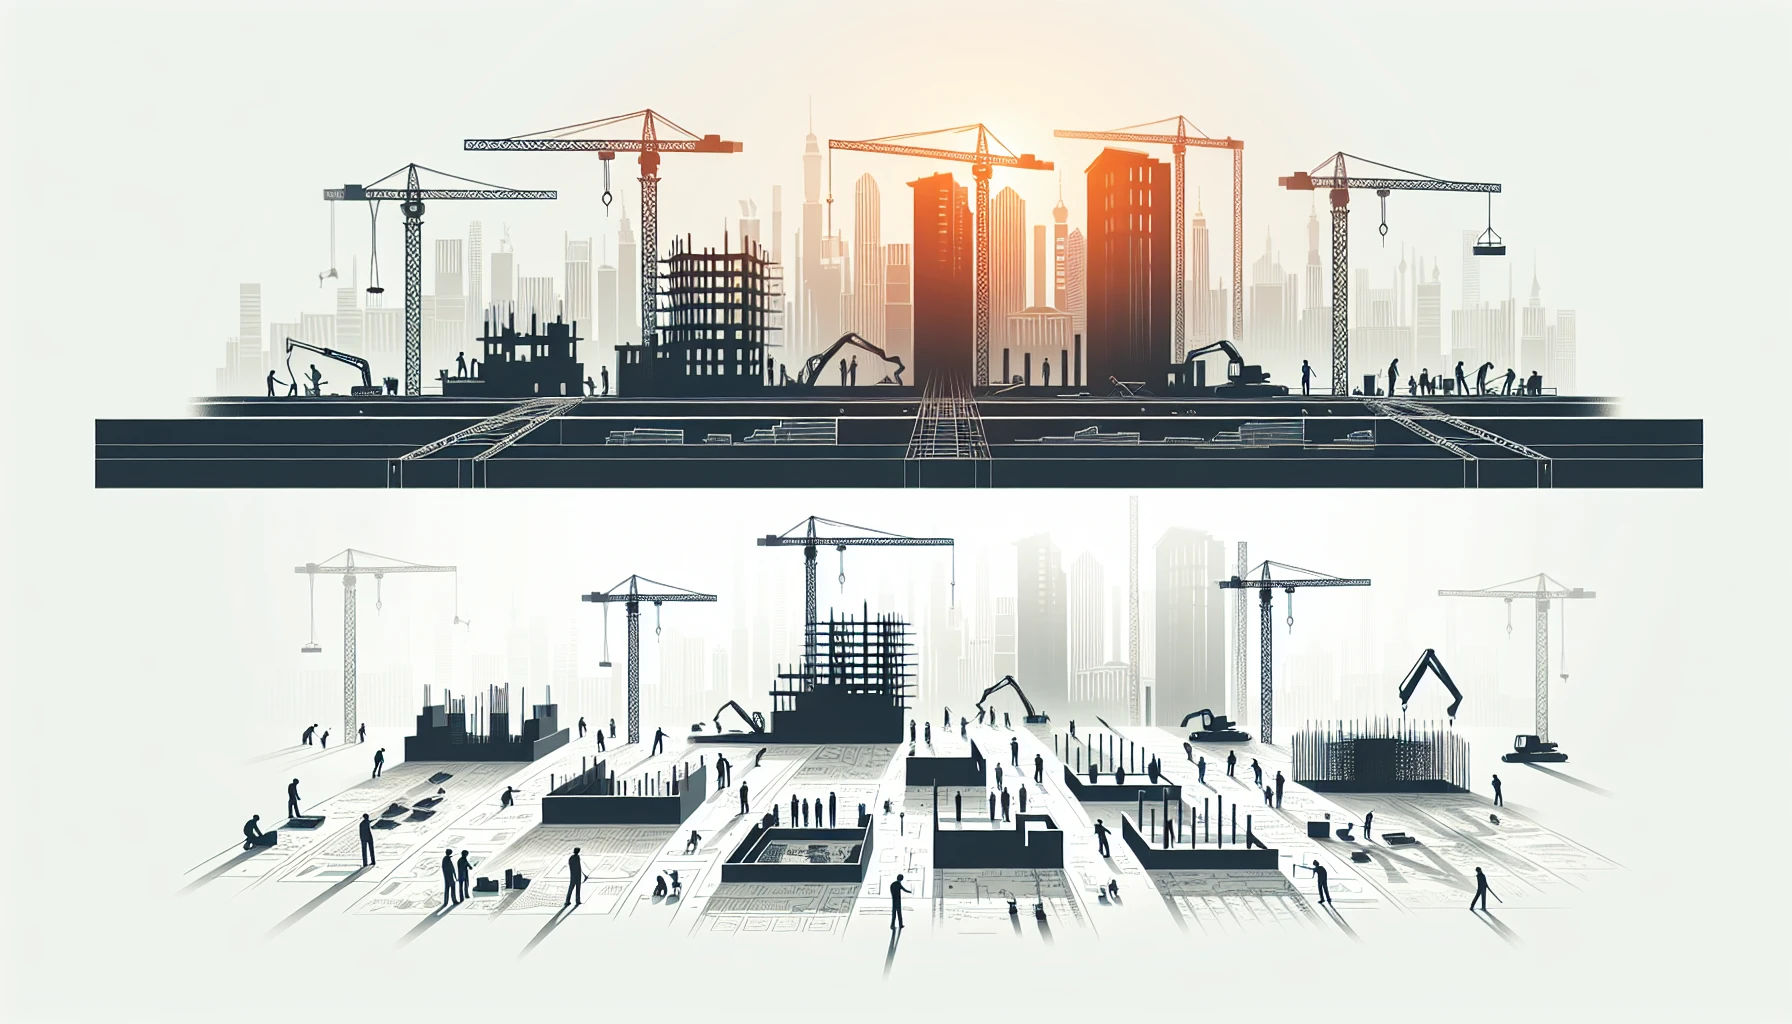 Project management stages in construction industry illustration